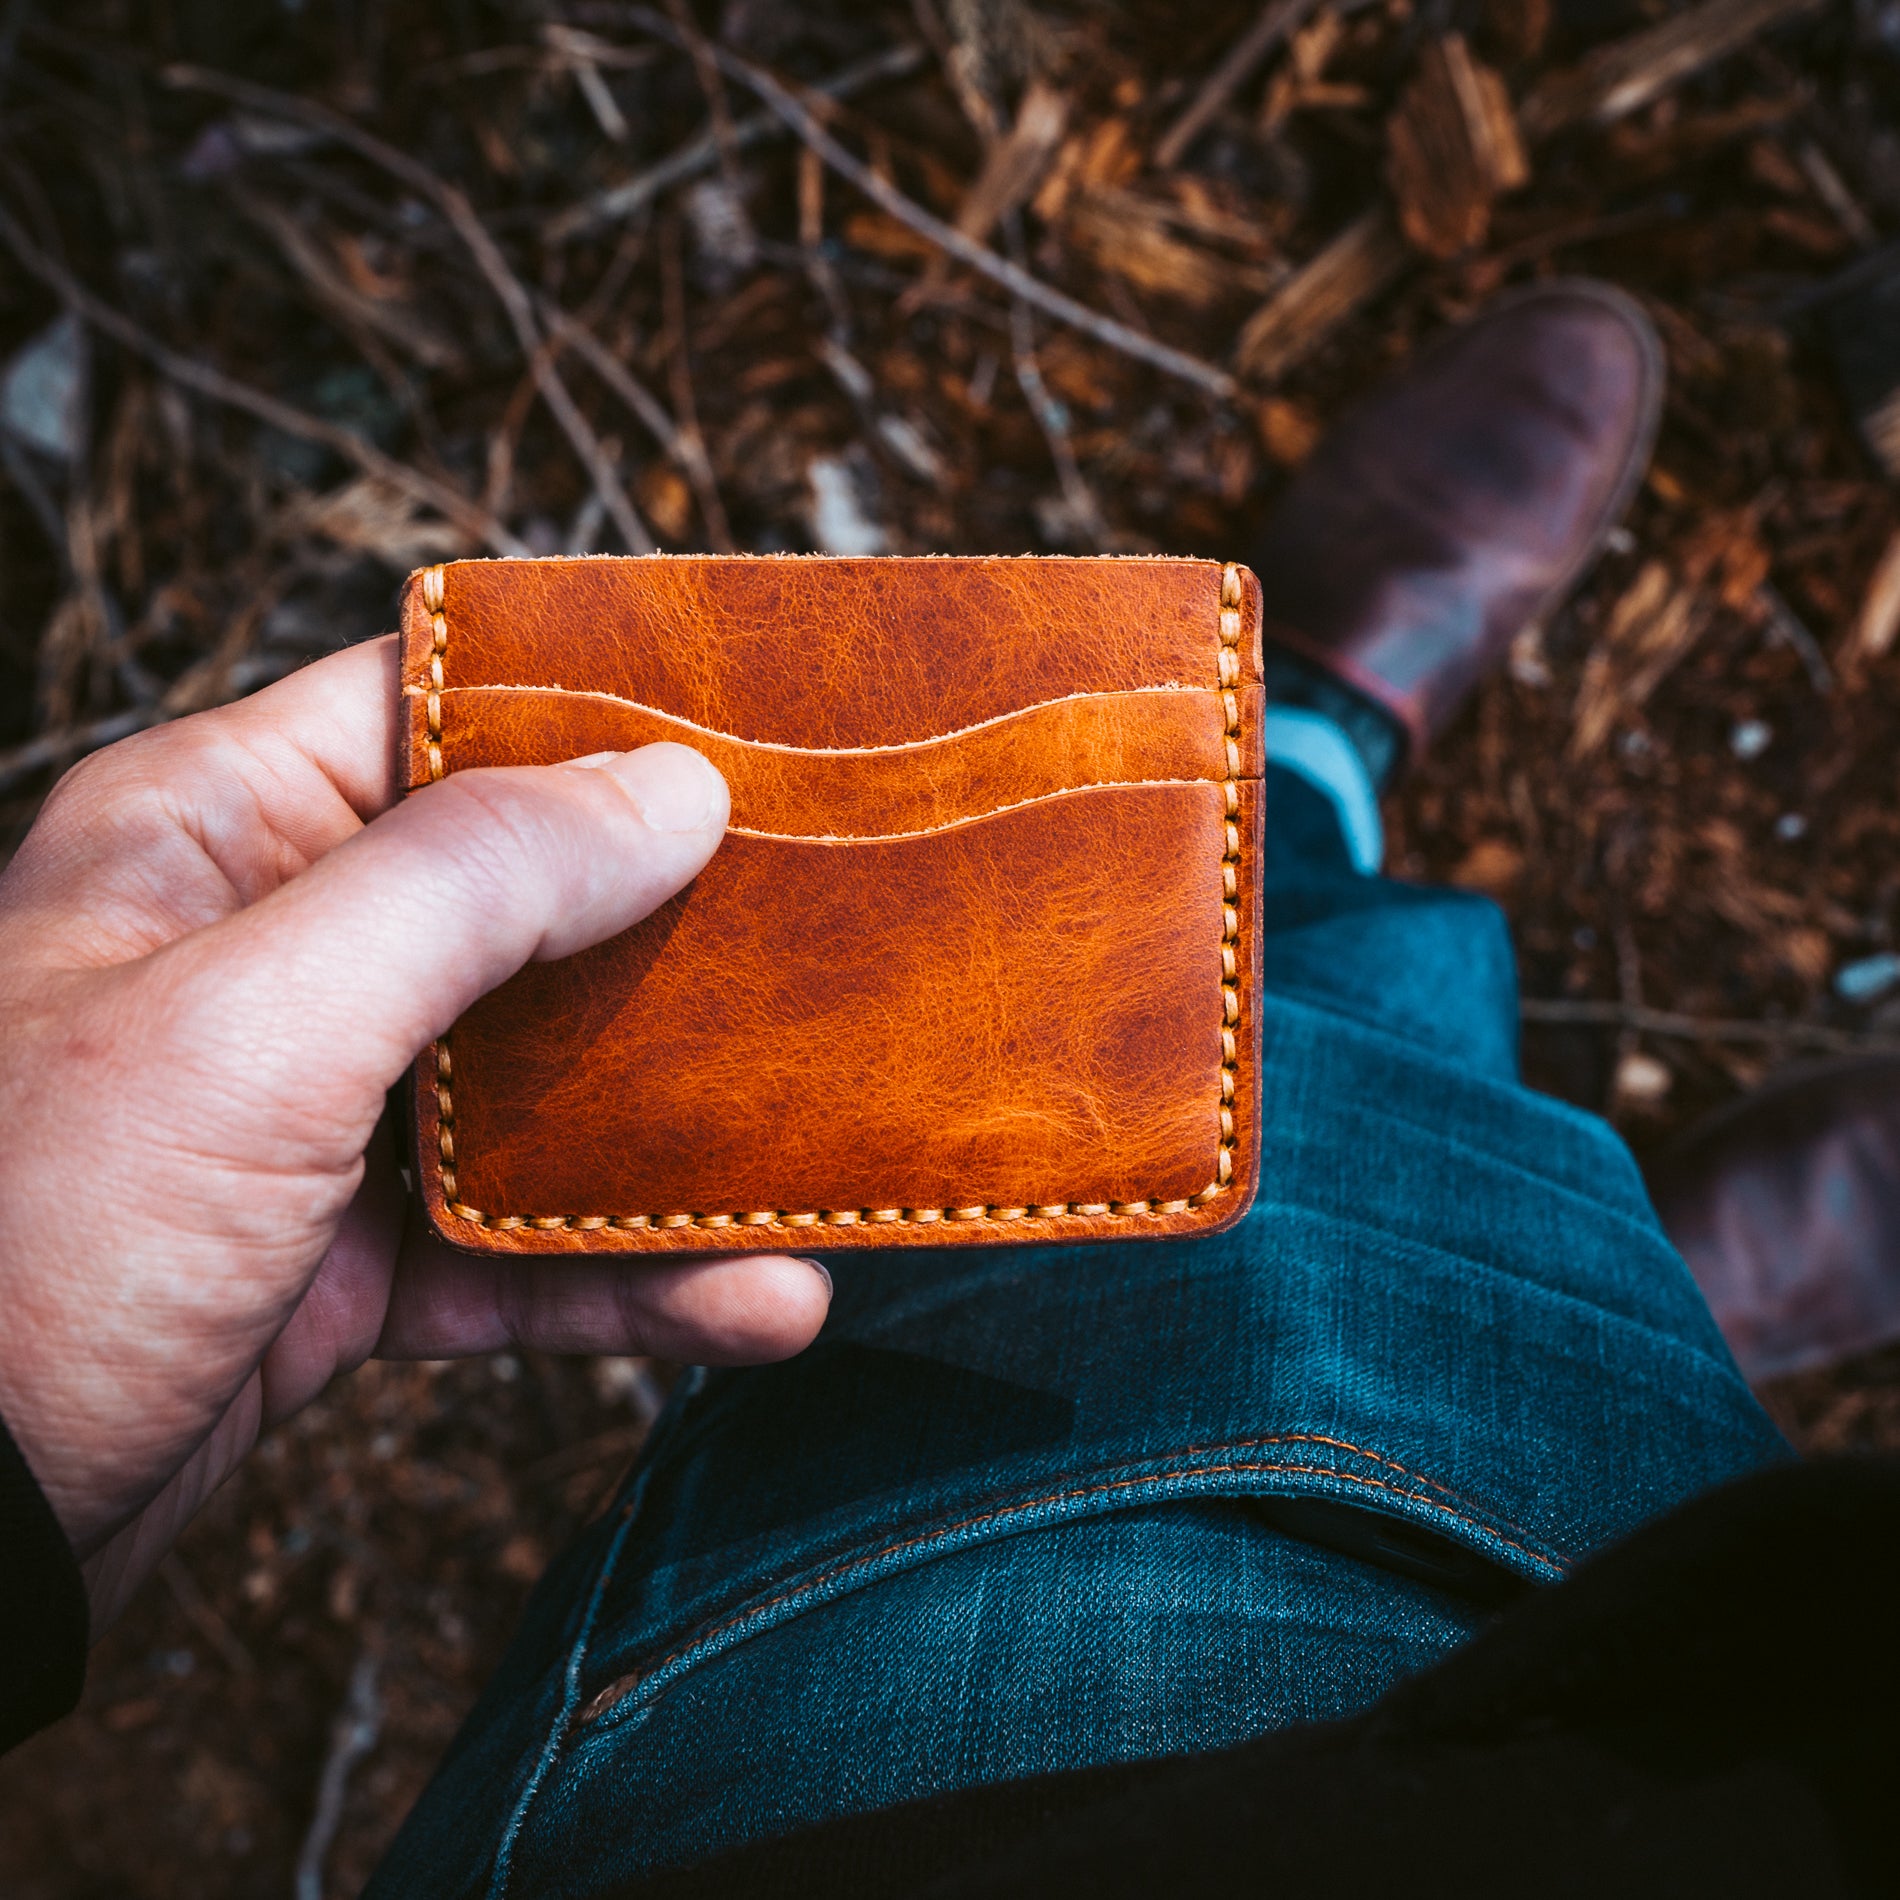 Holding a Leather ID Wallet in English Tan